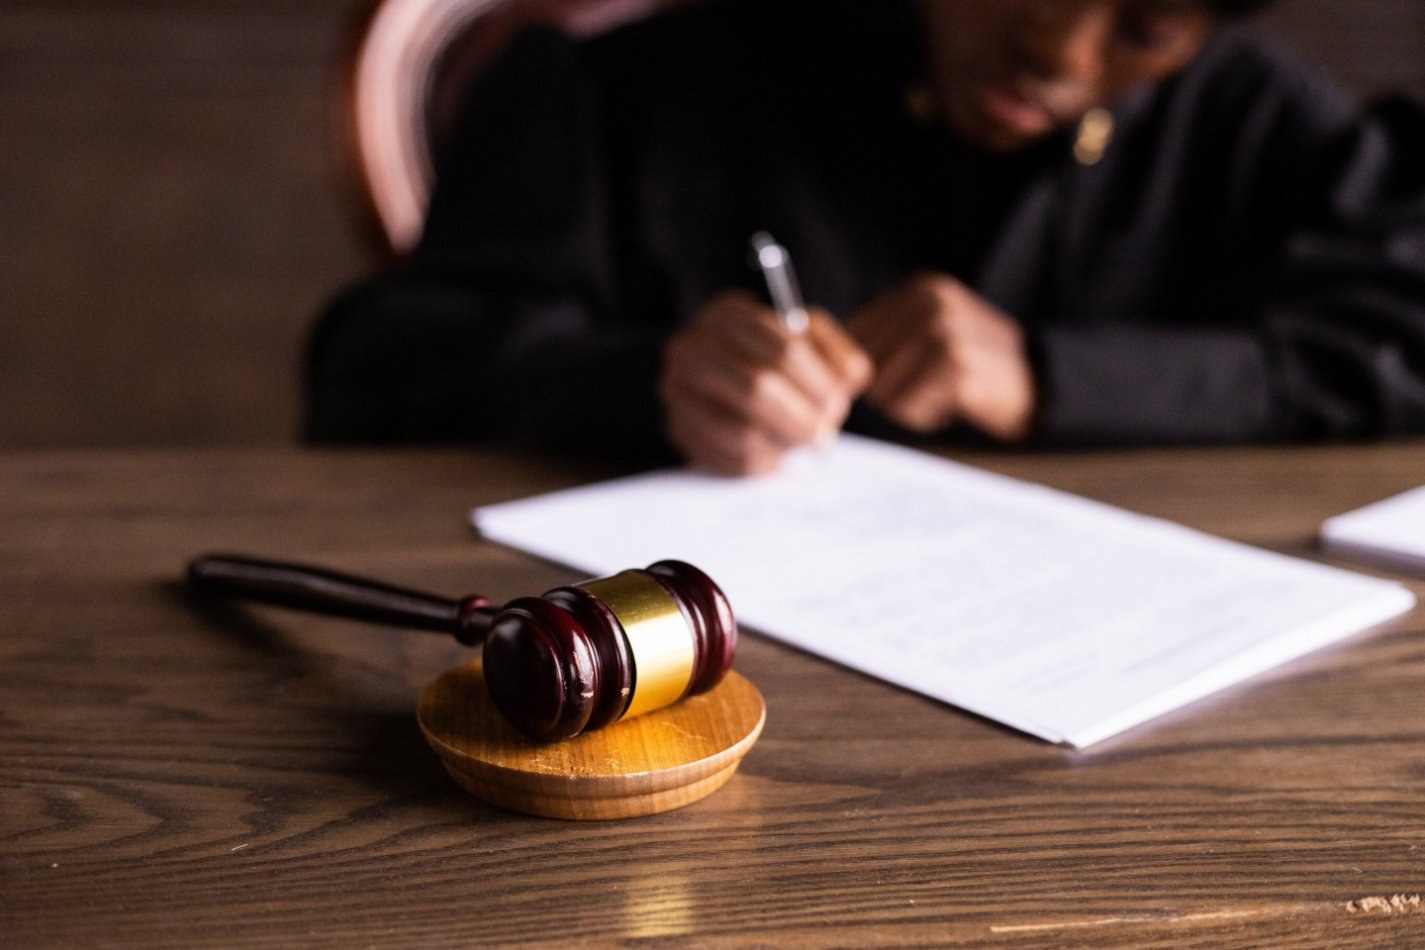 A gavel next to a person signing papers on a desk.